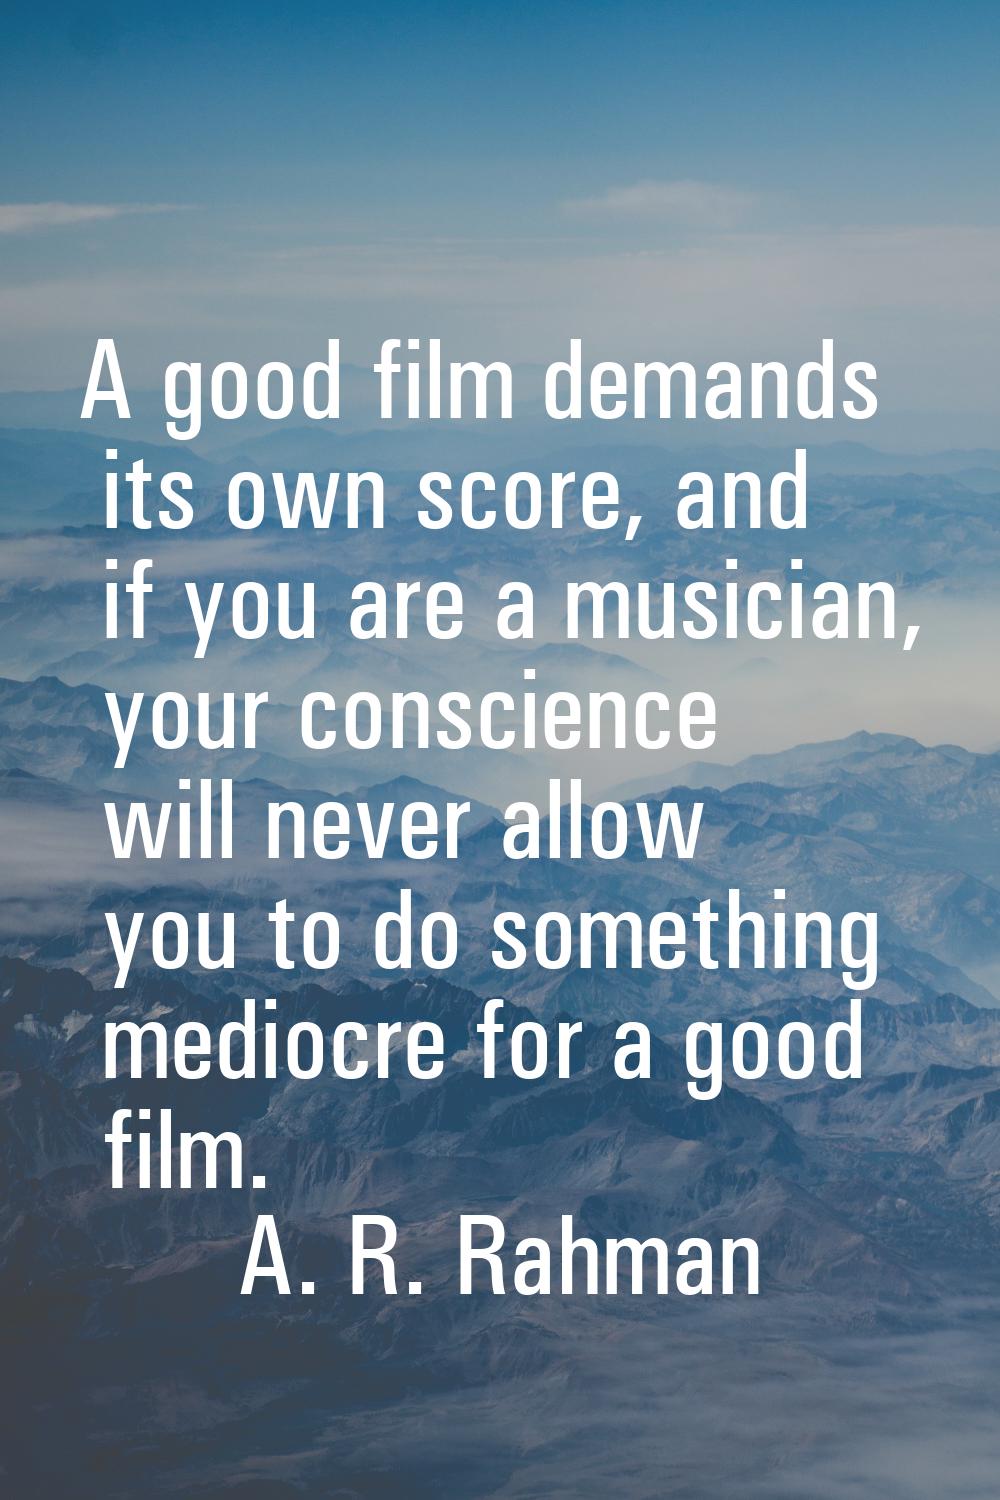 A good film demands its own score, and if you are a musician, your conscience will never allow you 